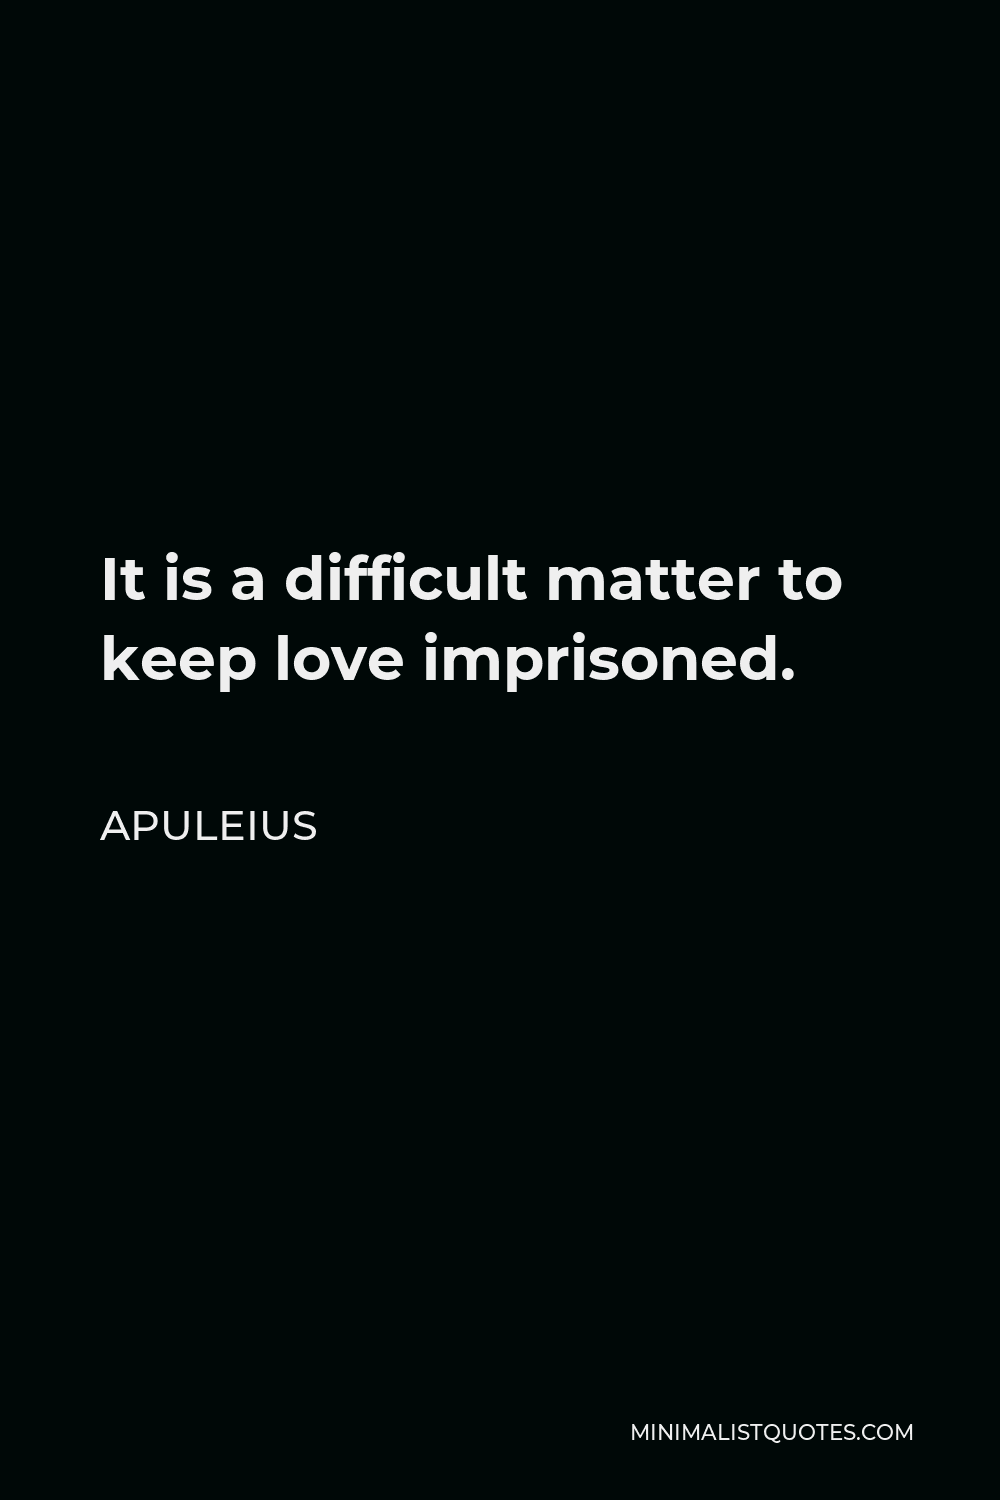 Apuleius Quote - It is a difficult matter to keep love imprisoned.